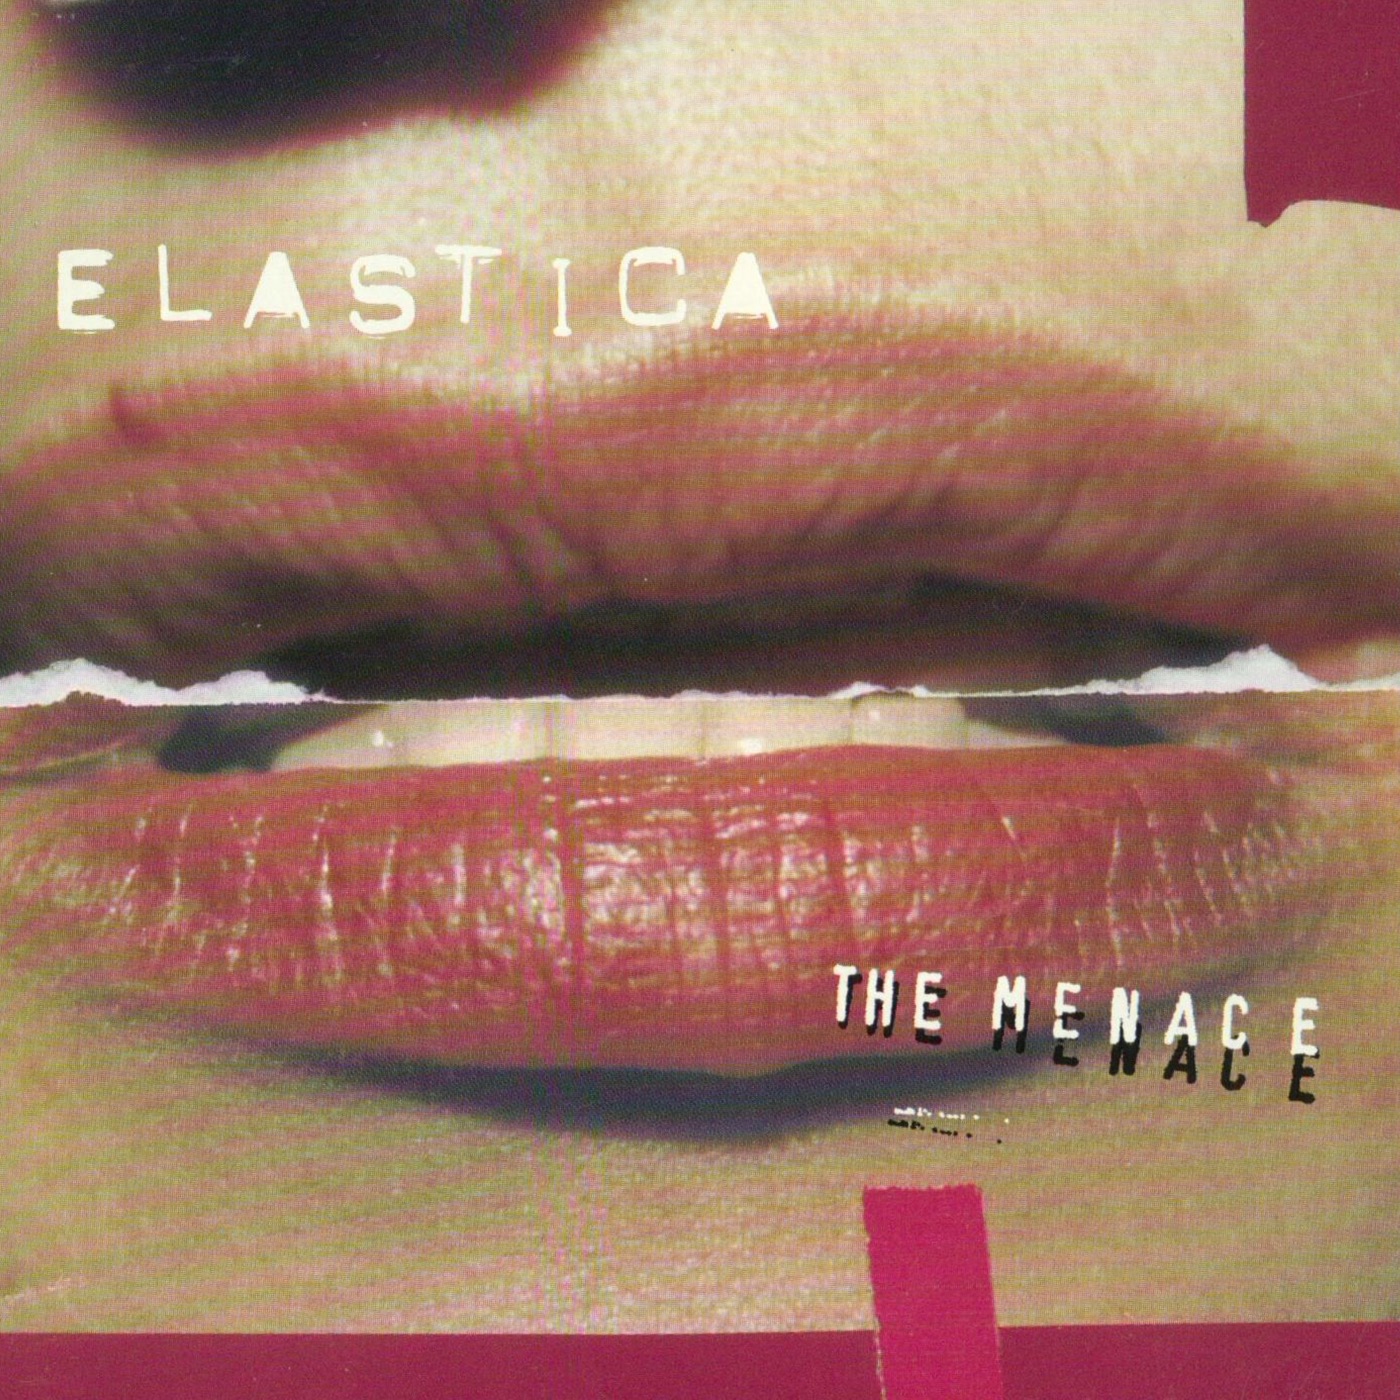 The Menace by Elastica